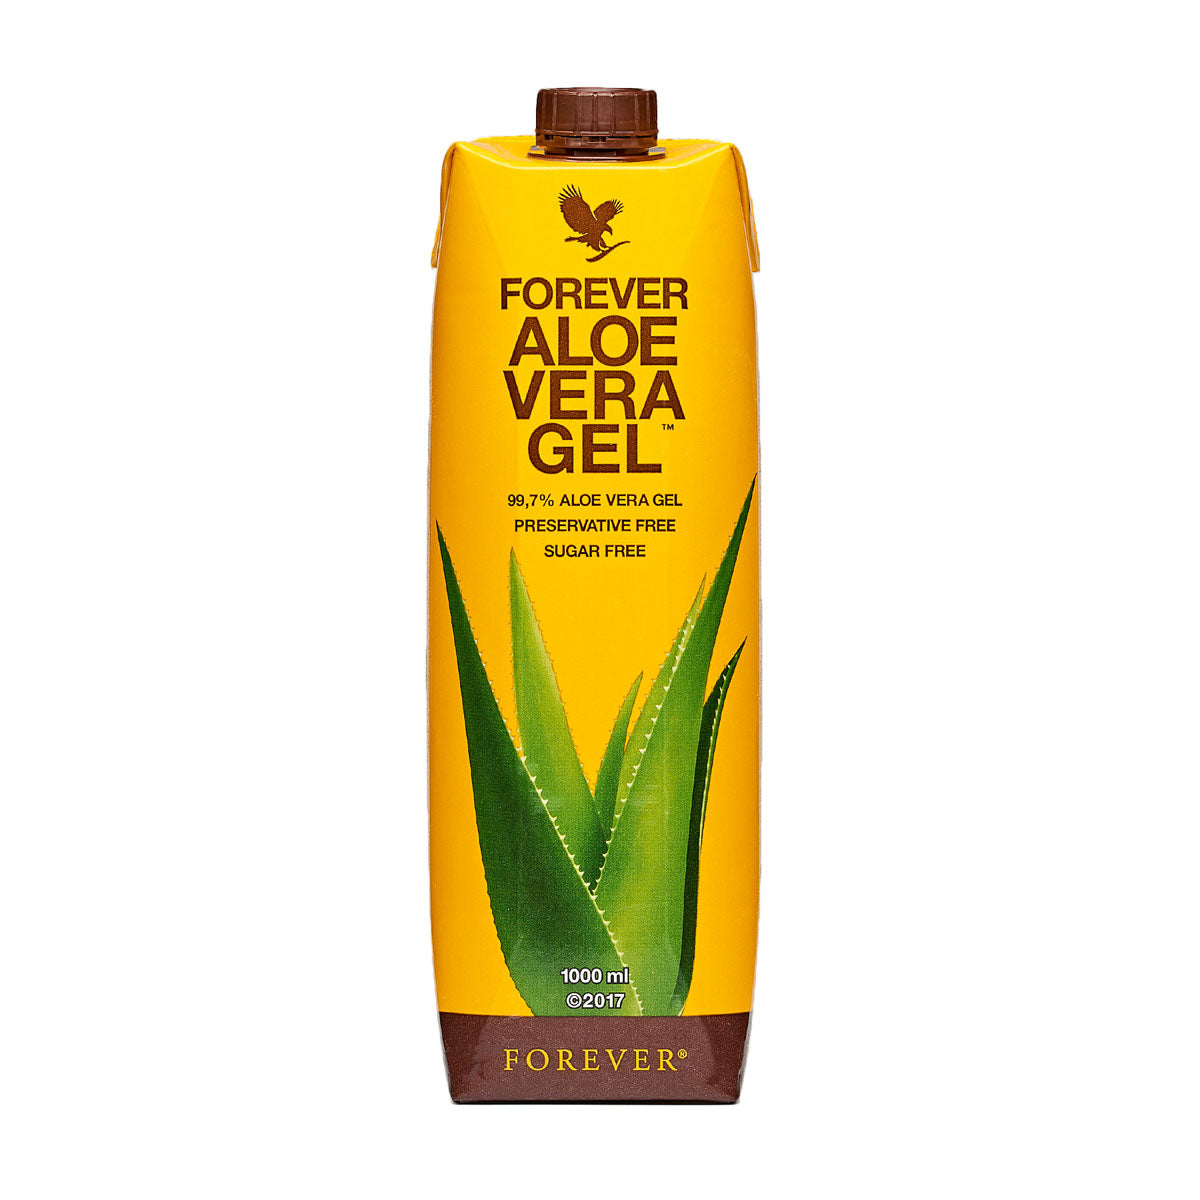 Aloe Vera Drinking Gel | Forever Living | Raw Living UK | Adaptogens | Supplements | Forever Living Aloe Vera: Aloe Vera is one of the most amazing adaptogenic plants that we know of. This new drinking gel boasts 99.7% inner leaf aloe gel.